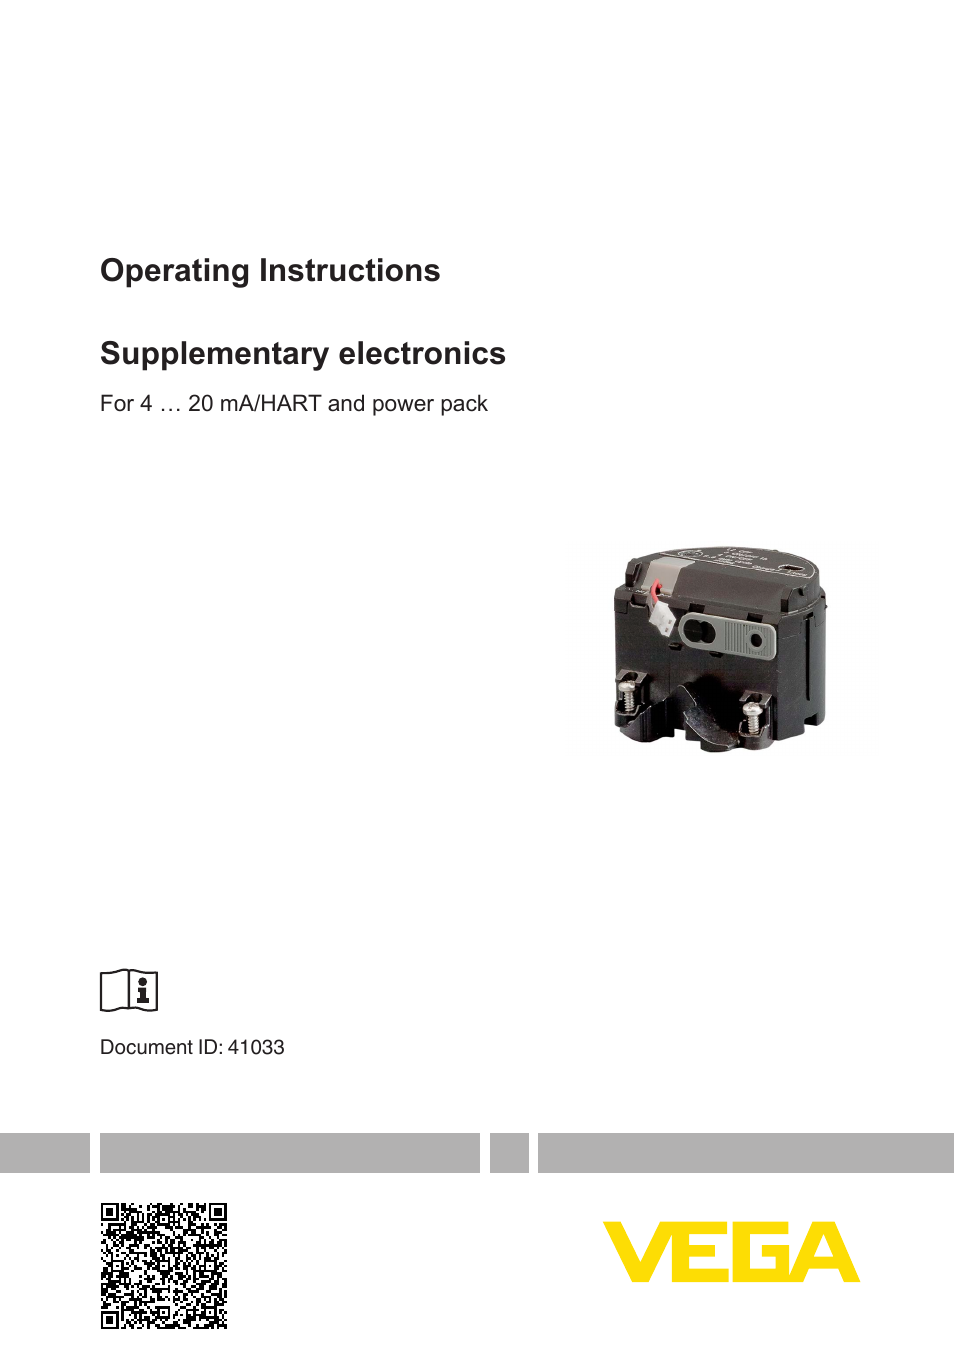 Supplementary electronics For 4 … 20 mA_HART and power pack